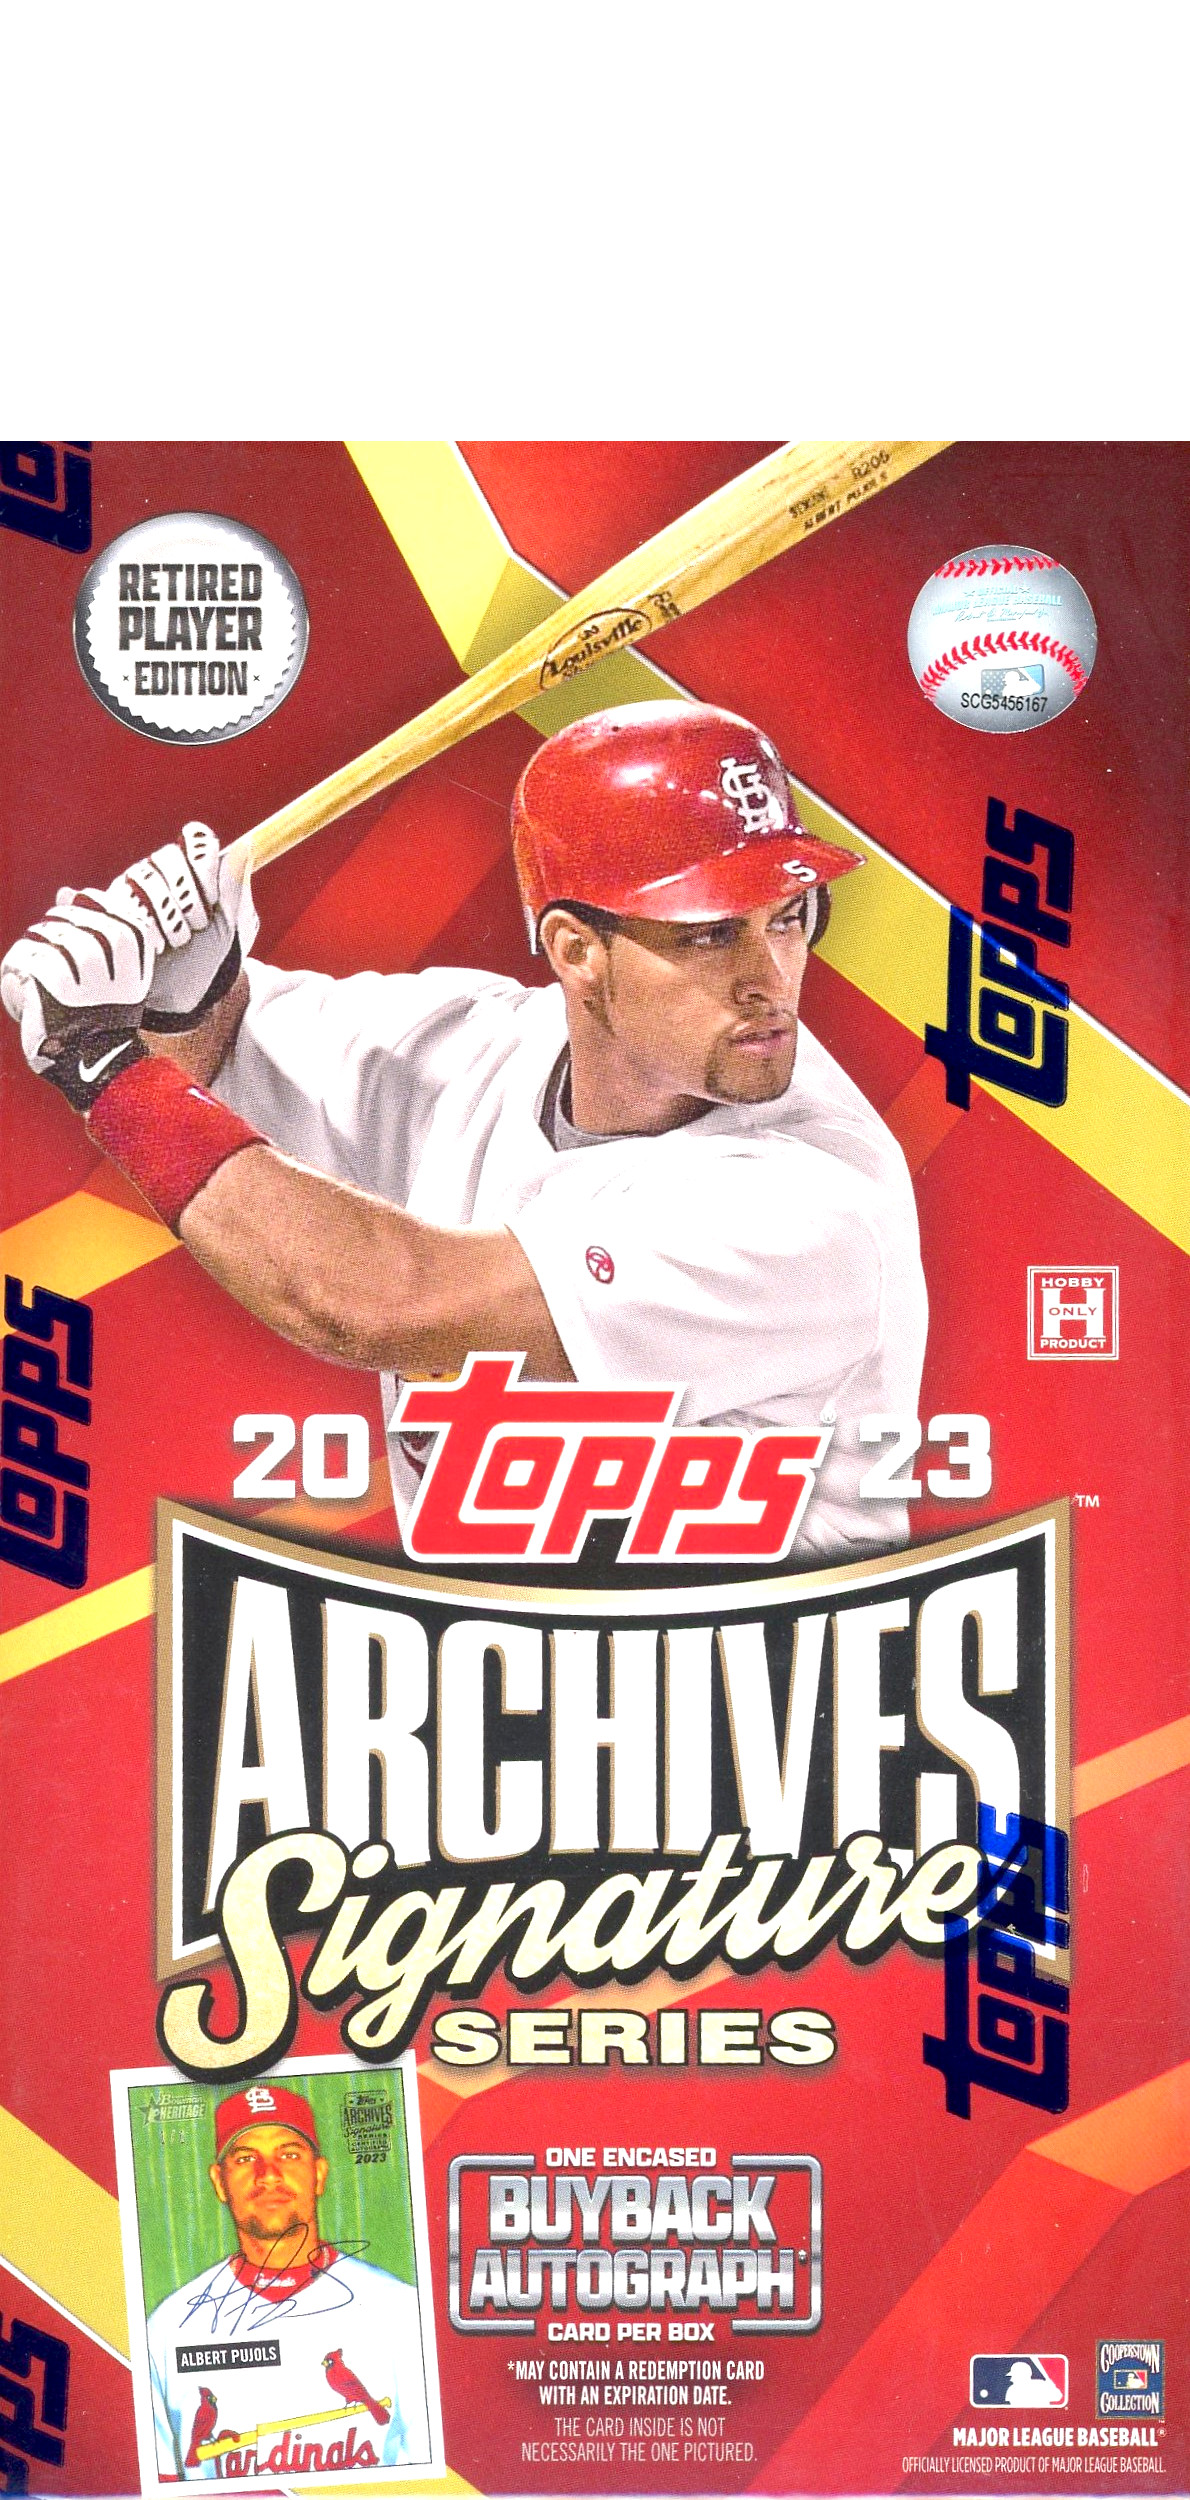 TOPPS ARCHIVES SIGNATURE - その他